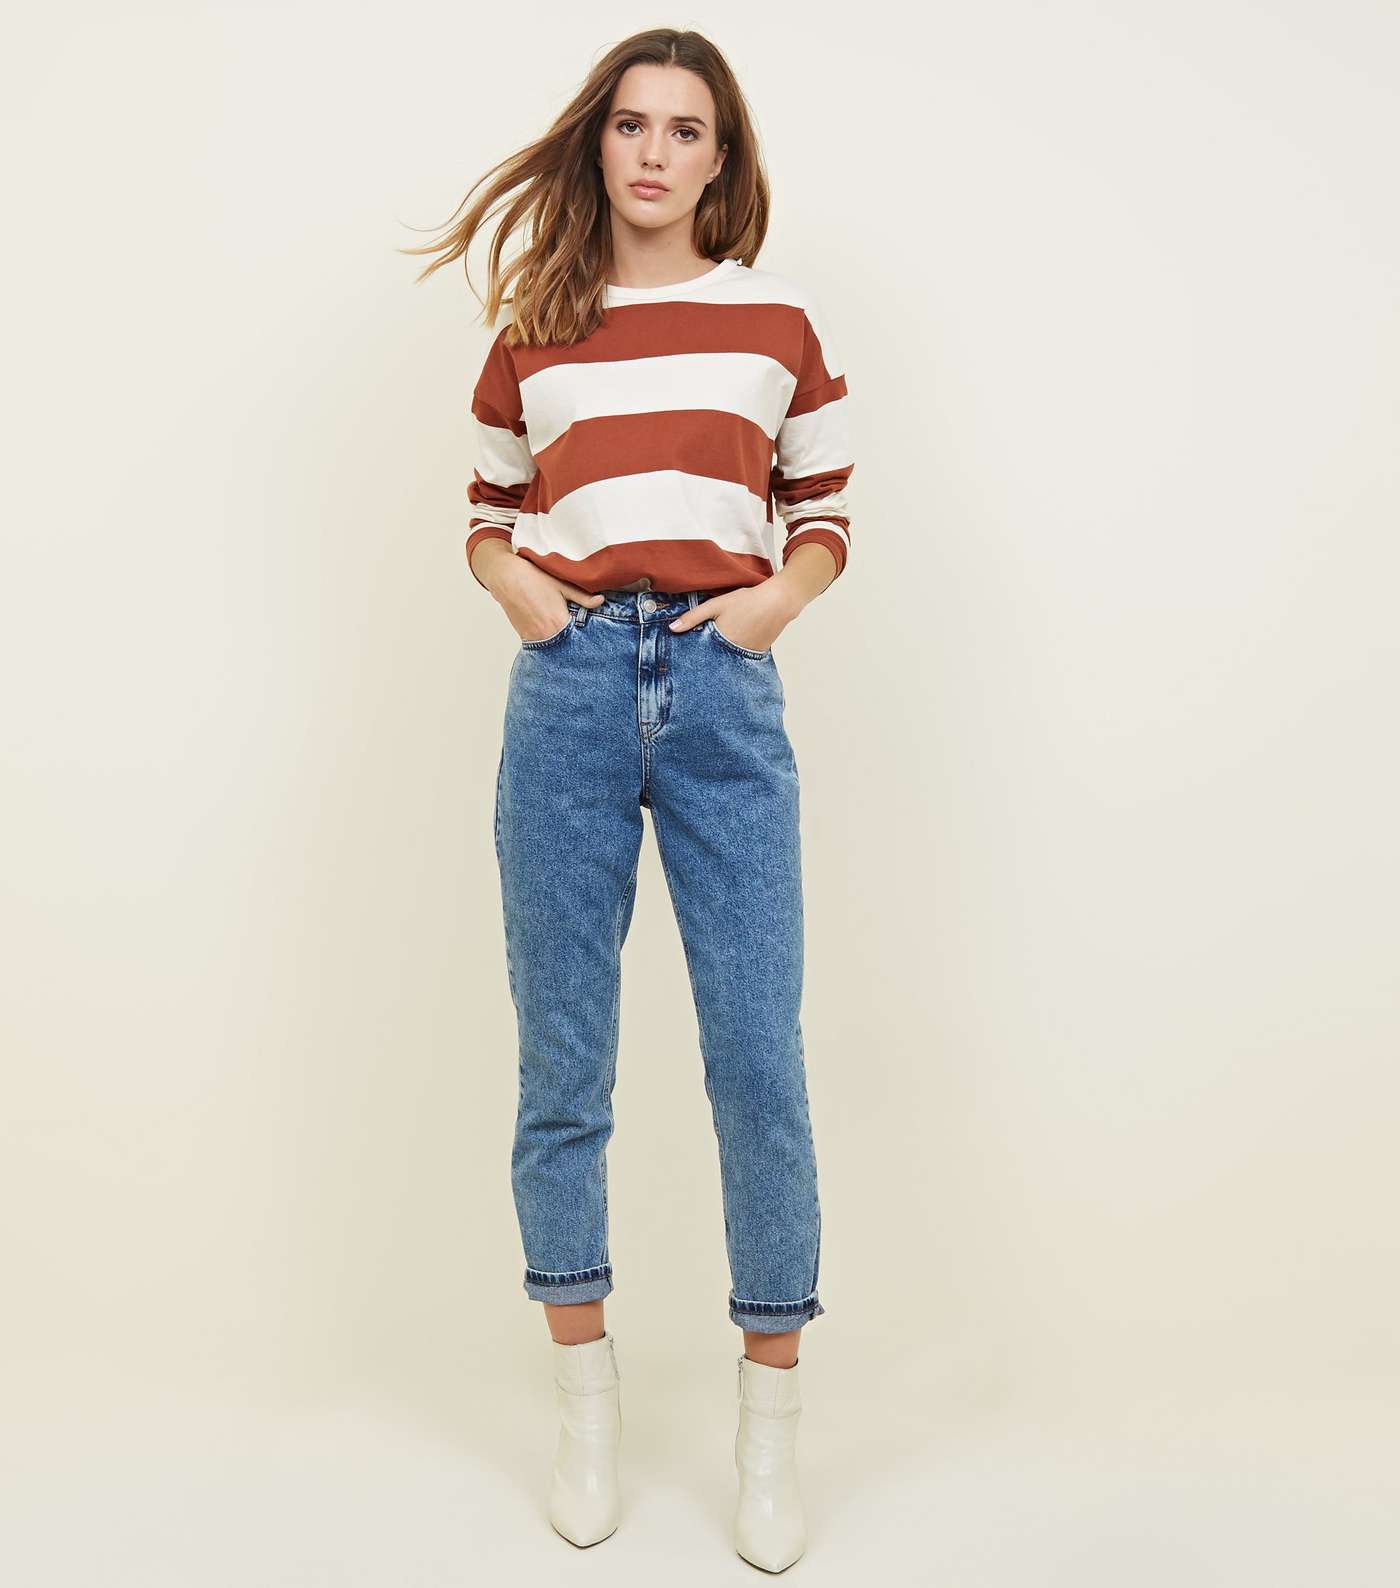 Rust Stripe Slouchy Rugby Top Image 2